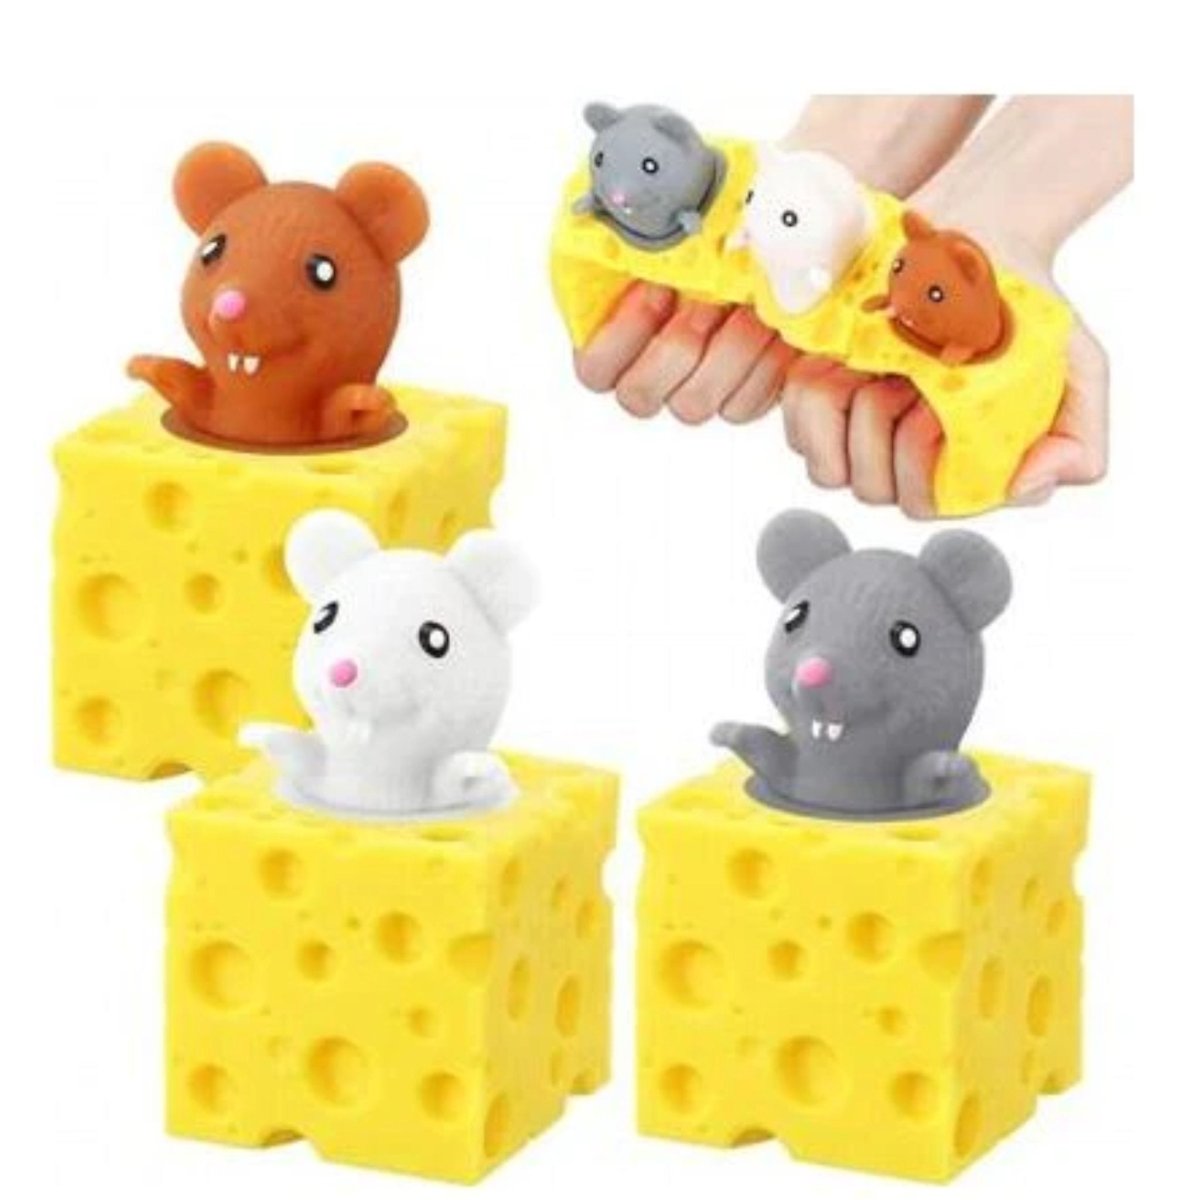 Mice N Cheese Pop Out Mouse - Kids Party Craft